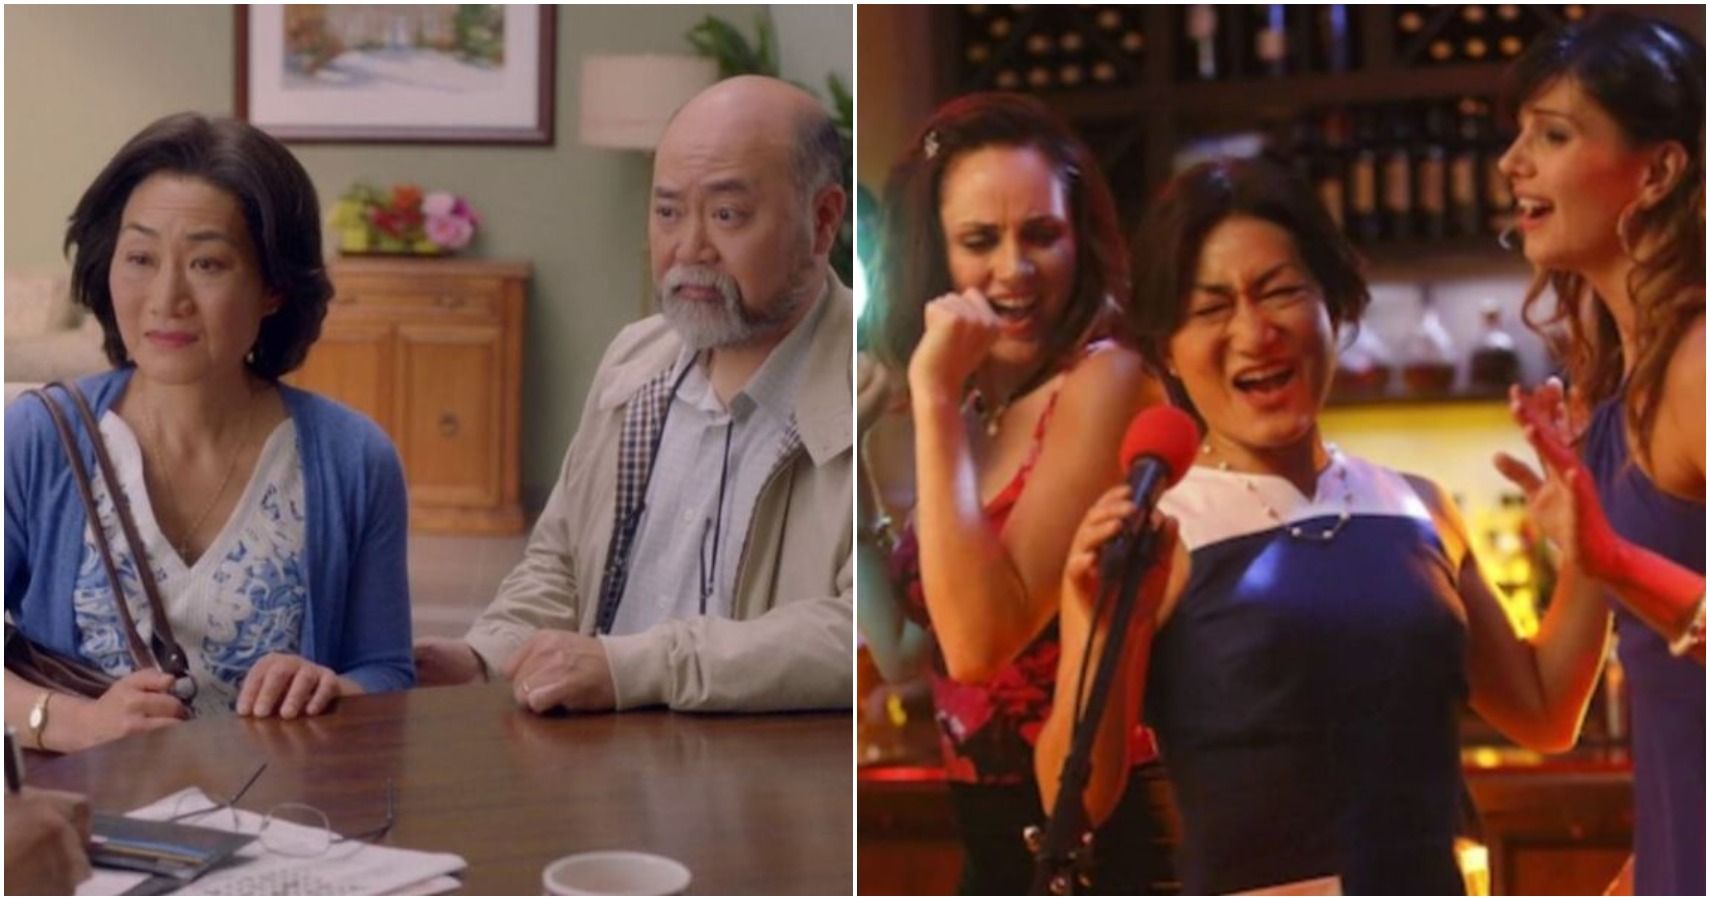 Kim’s Convenience The 10 HighestRated Episodes (According To IMDb)